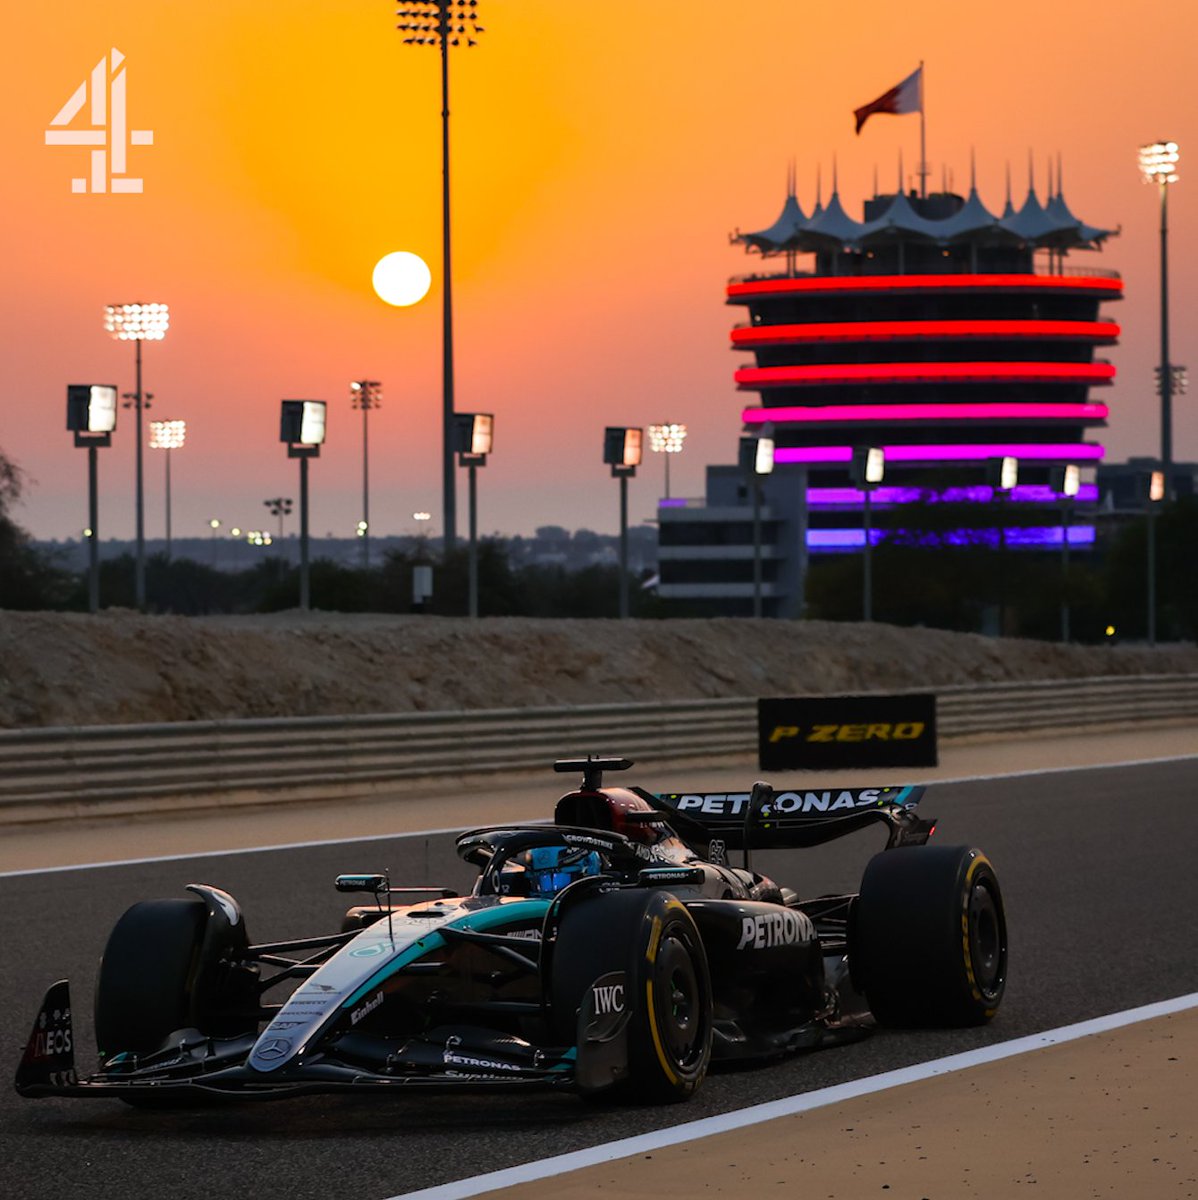 Ready for some racing? 🏁 Highlights from the Bahrain Grand Prix are live now on @Channel4 🙌 #C4F1 | #F1 | #BahrainGP 🇧🇭